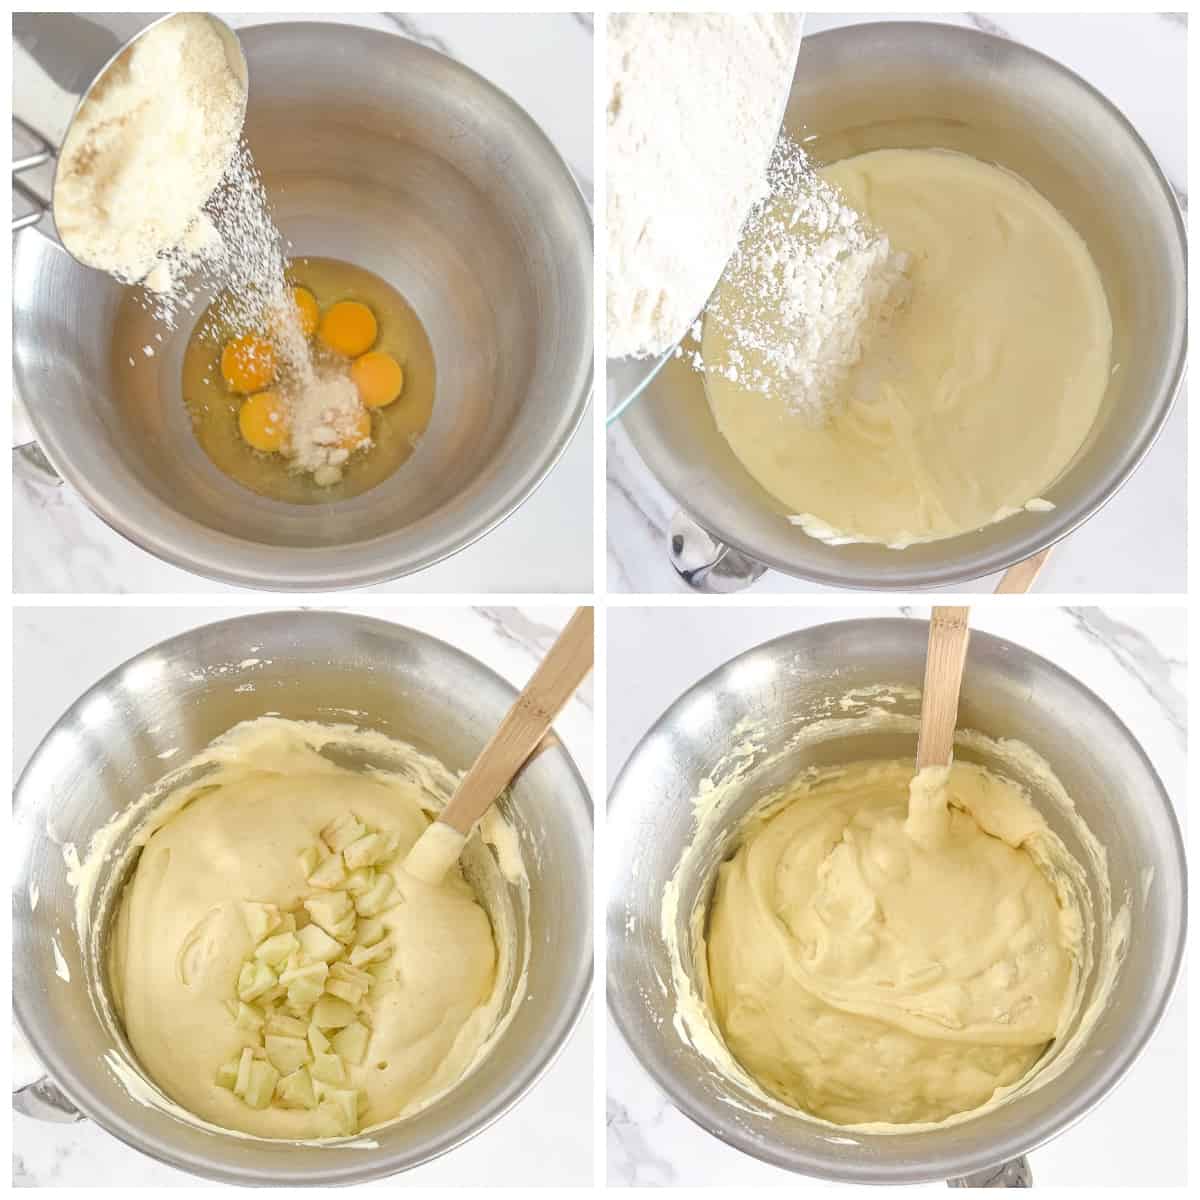 Gradually add the flour mixture to the beaten eggs and sugar. Stir the mixture using a whisk until all the ingredients are well combined.